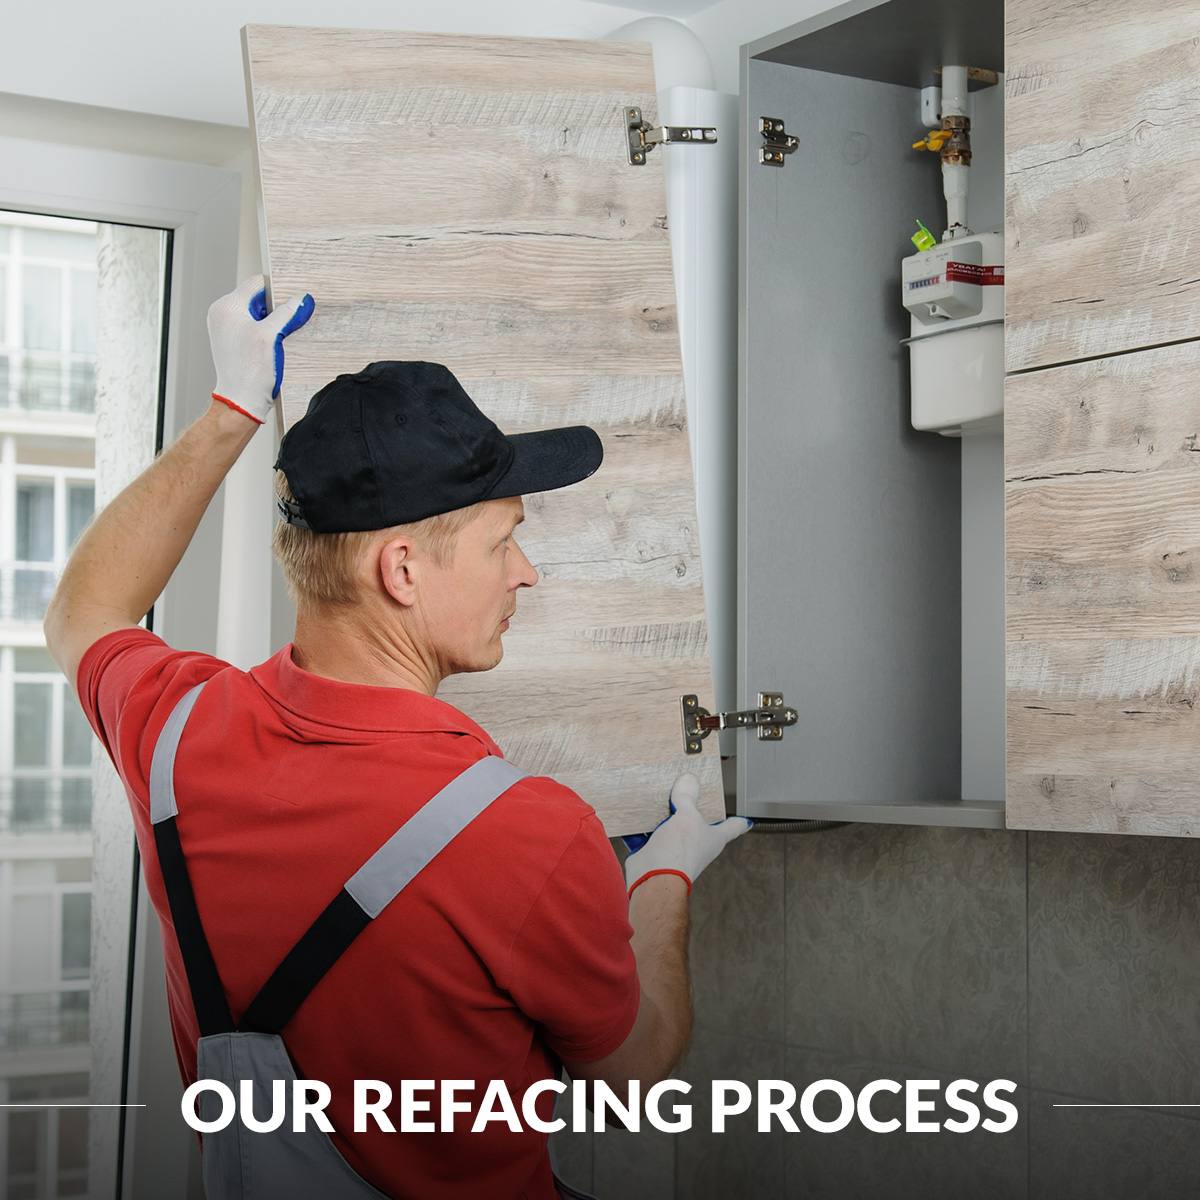 Our refacing process